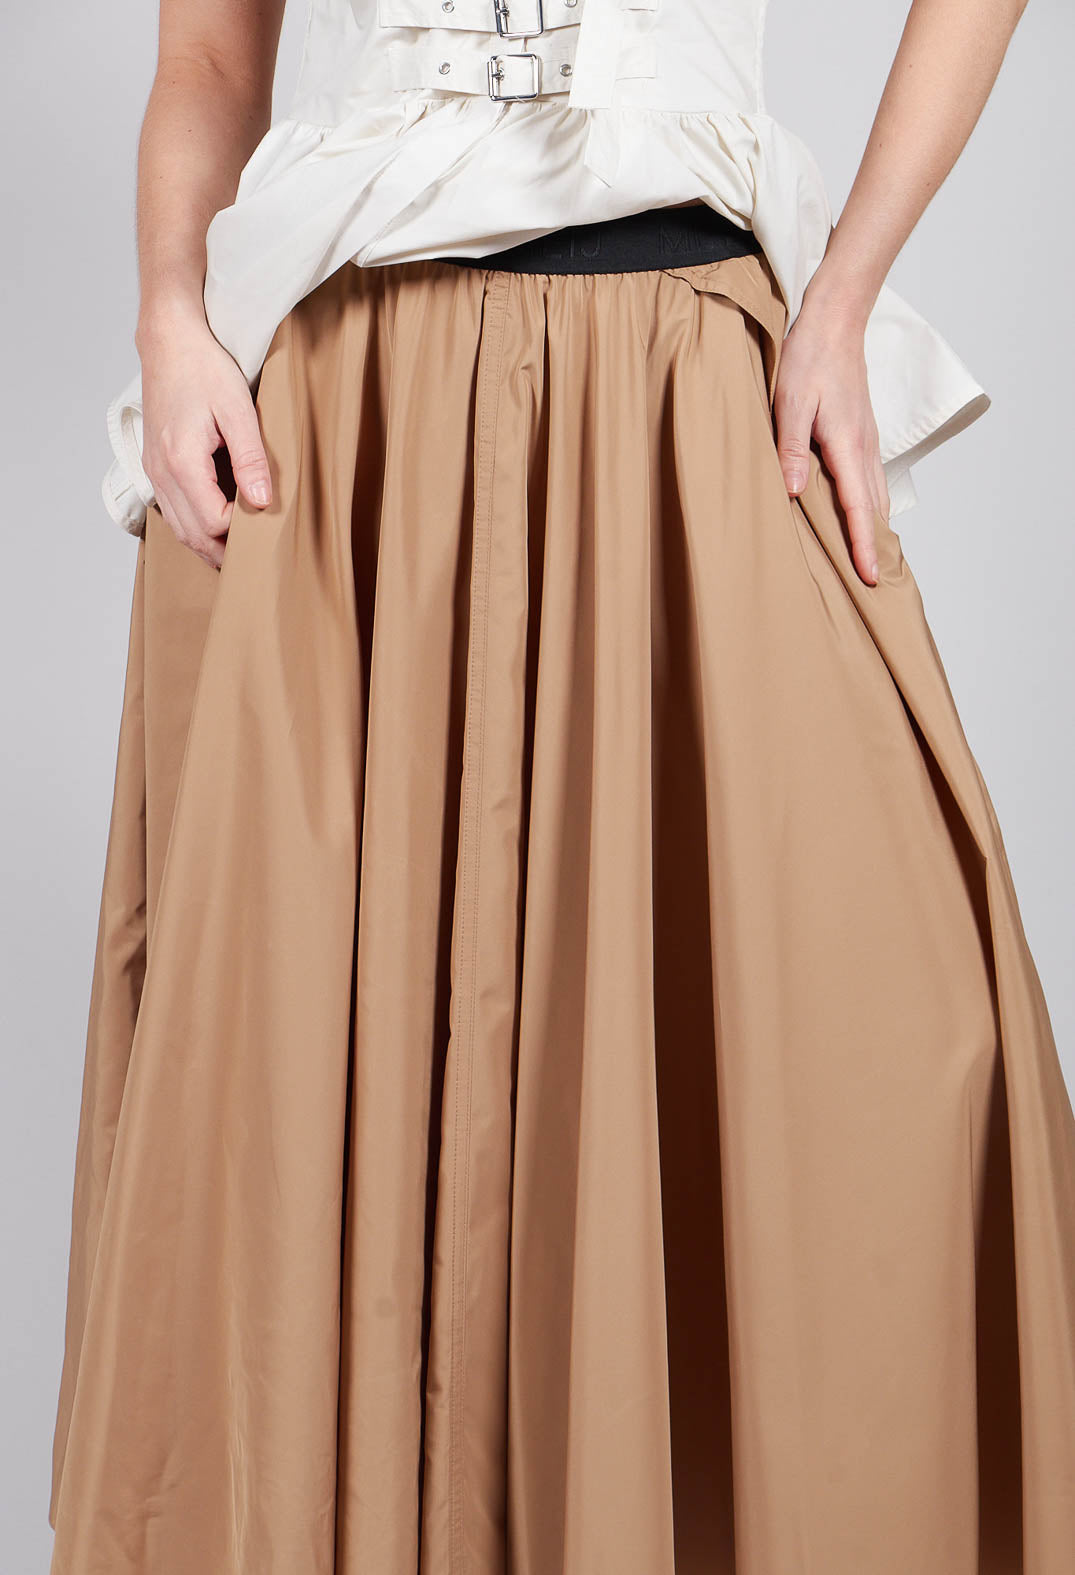 Pleated Skirt in Camel